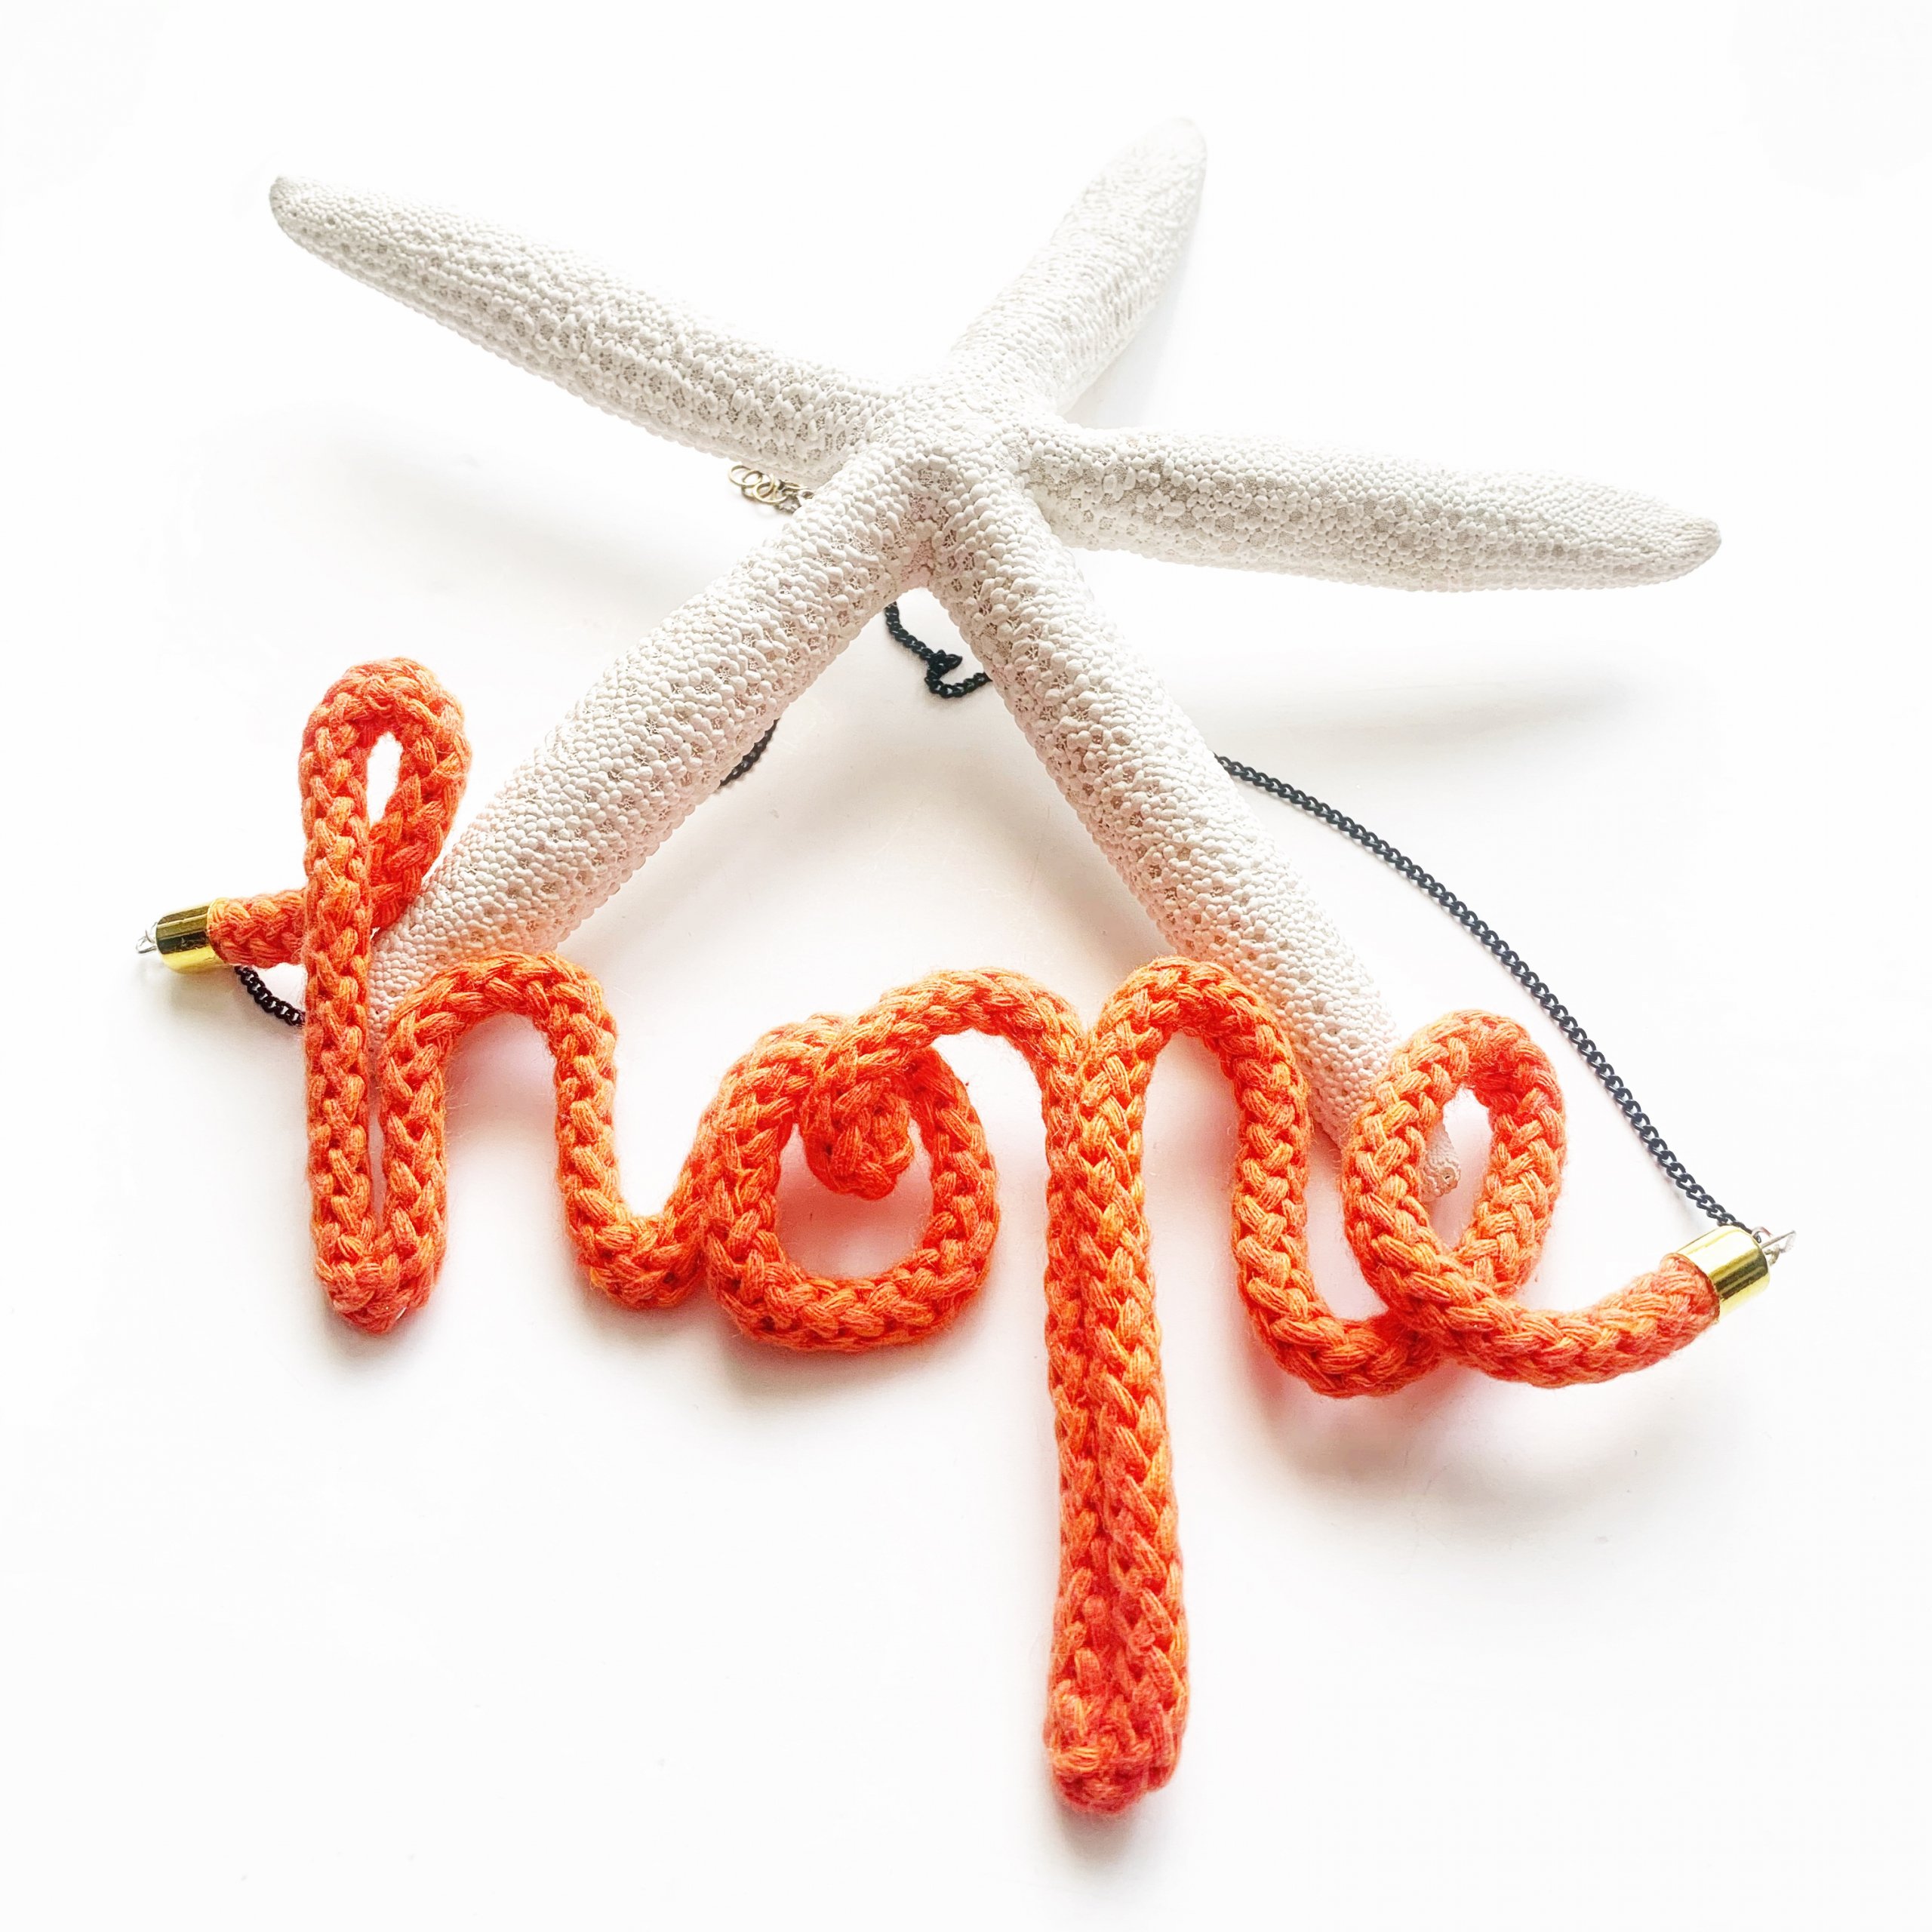 HBT – Word Necklace – GBP 20.00 – The Hope Necklace